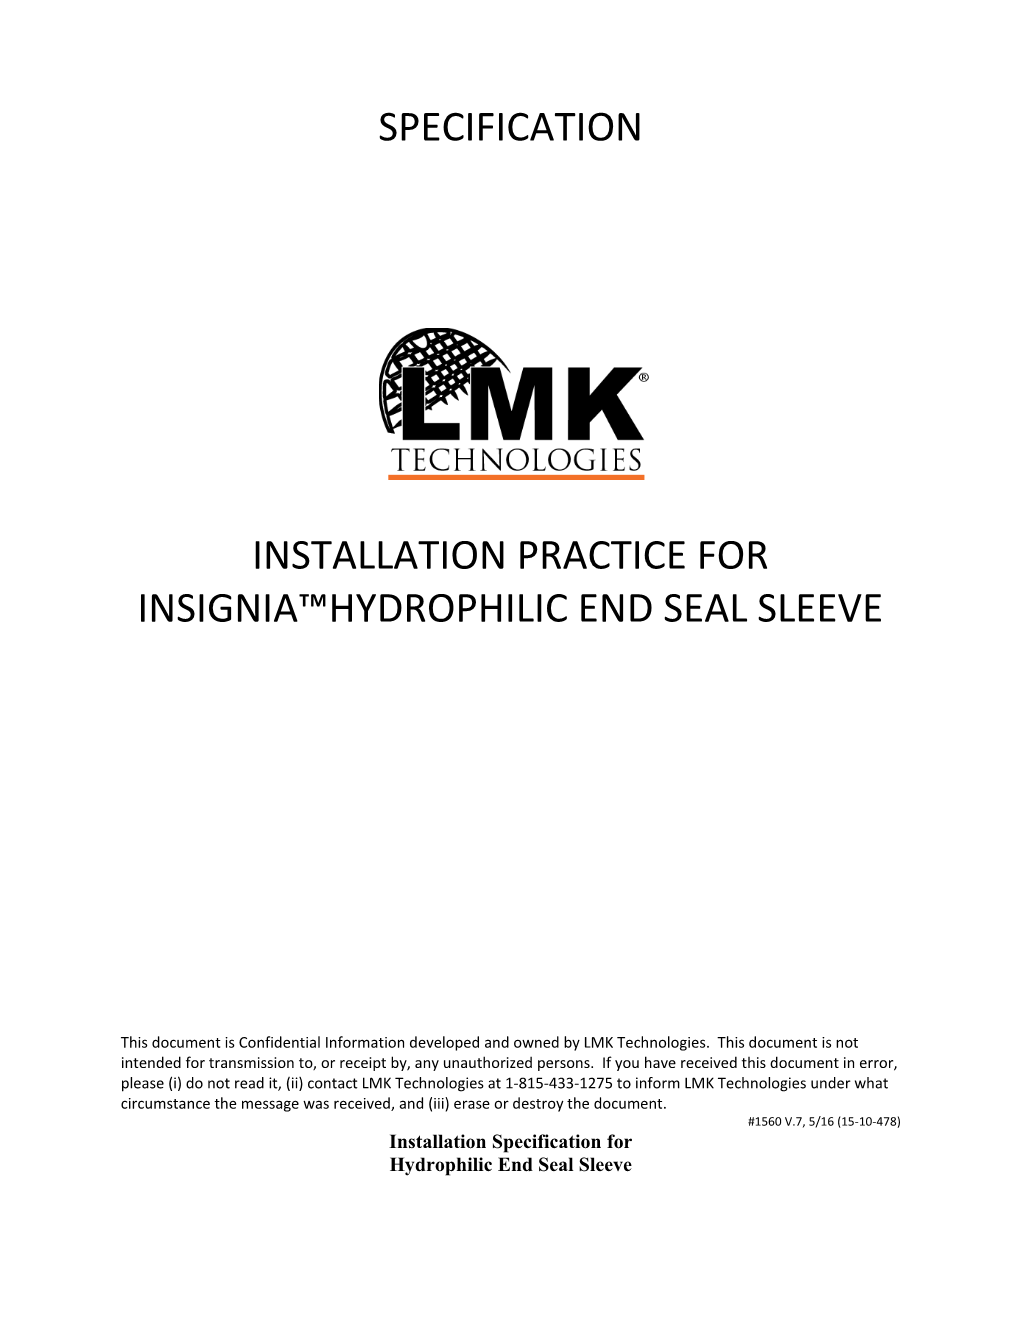 Insignia Hydrophilic End Seal Sleeve